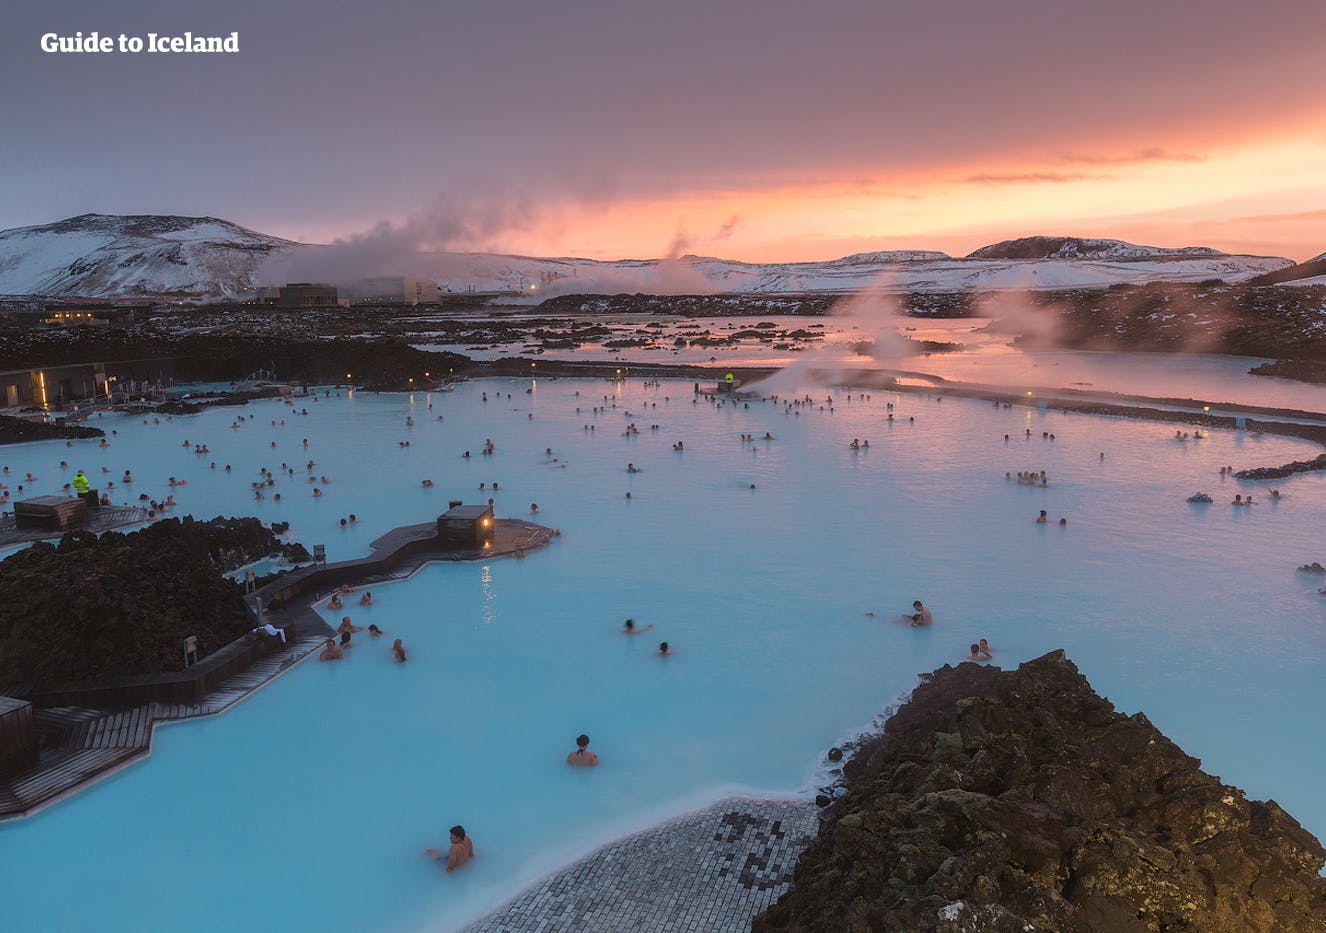 Breathe in the cold winter air as you unwind at the Blue Lagoon on a winter self-drive tour.